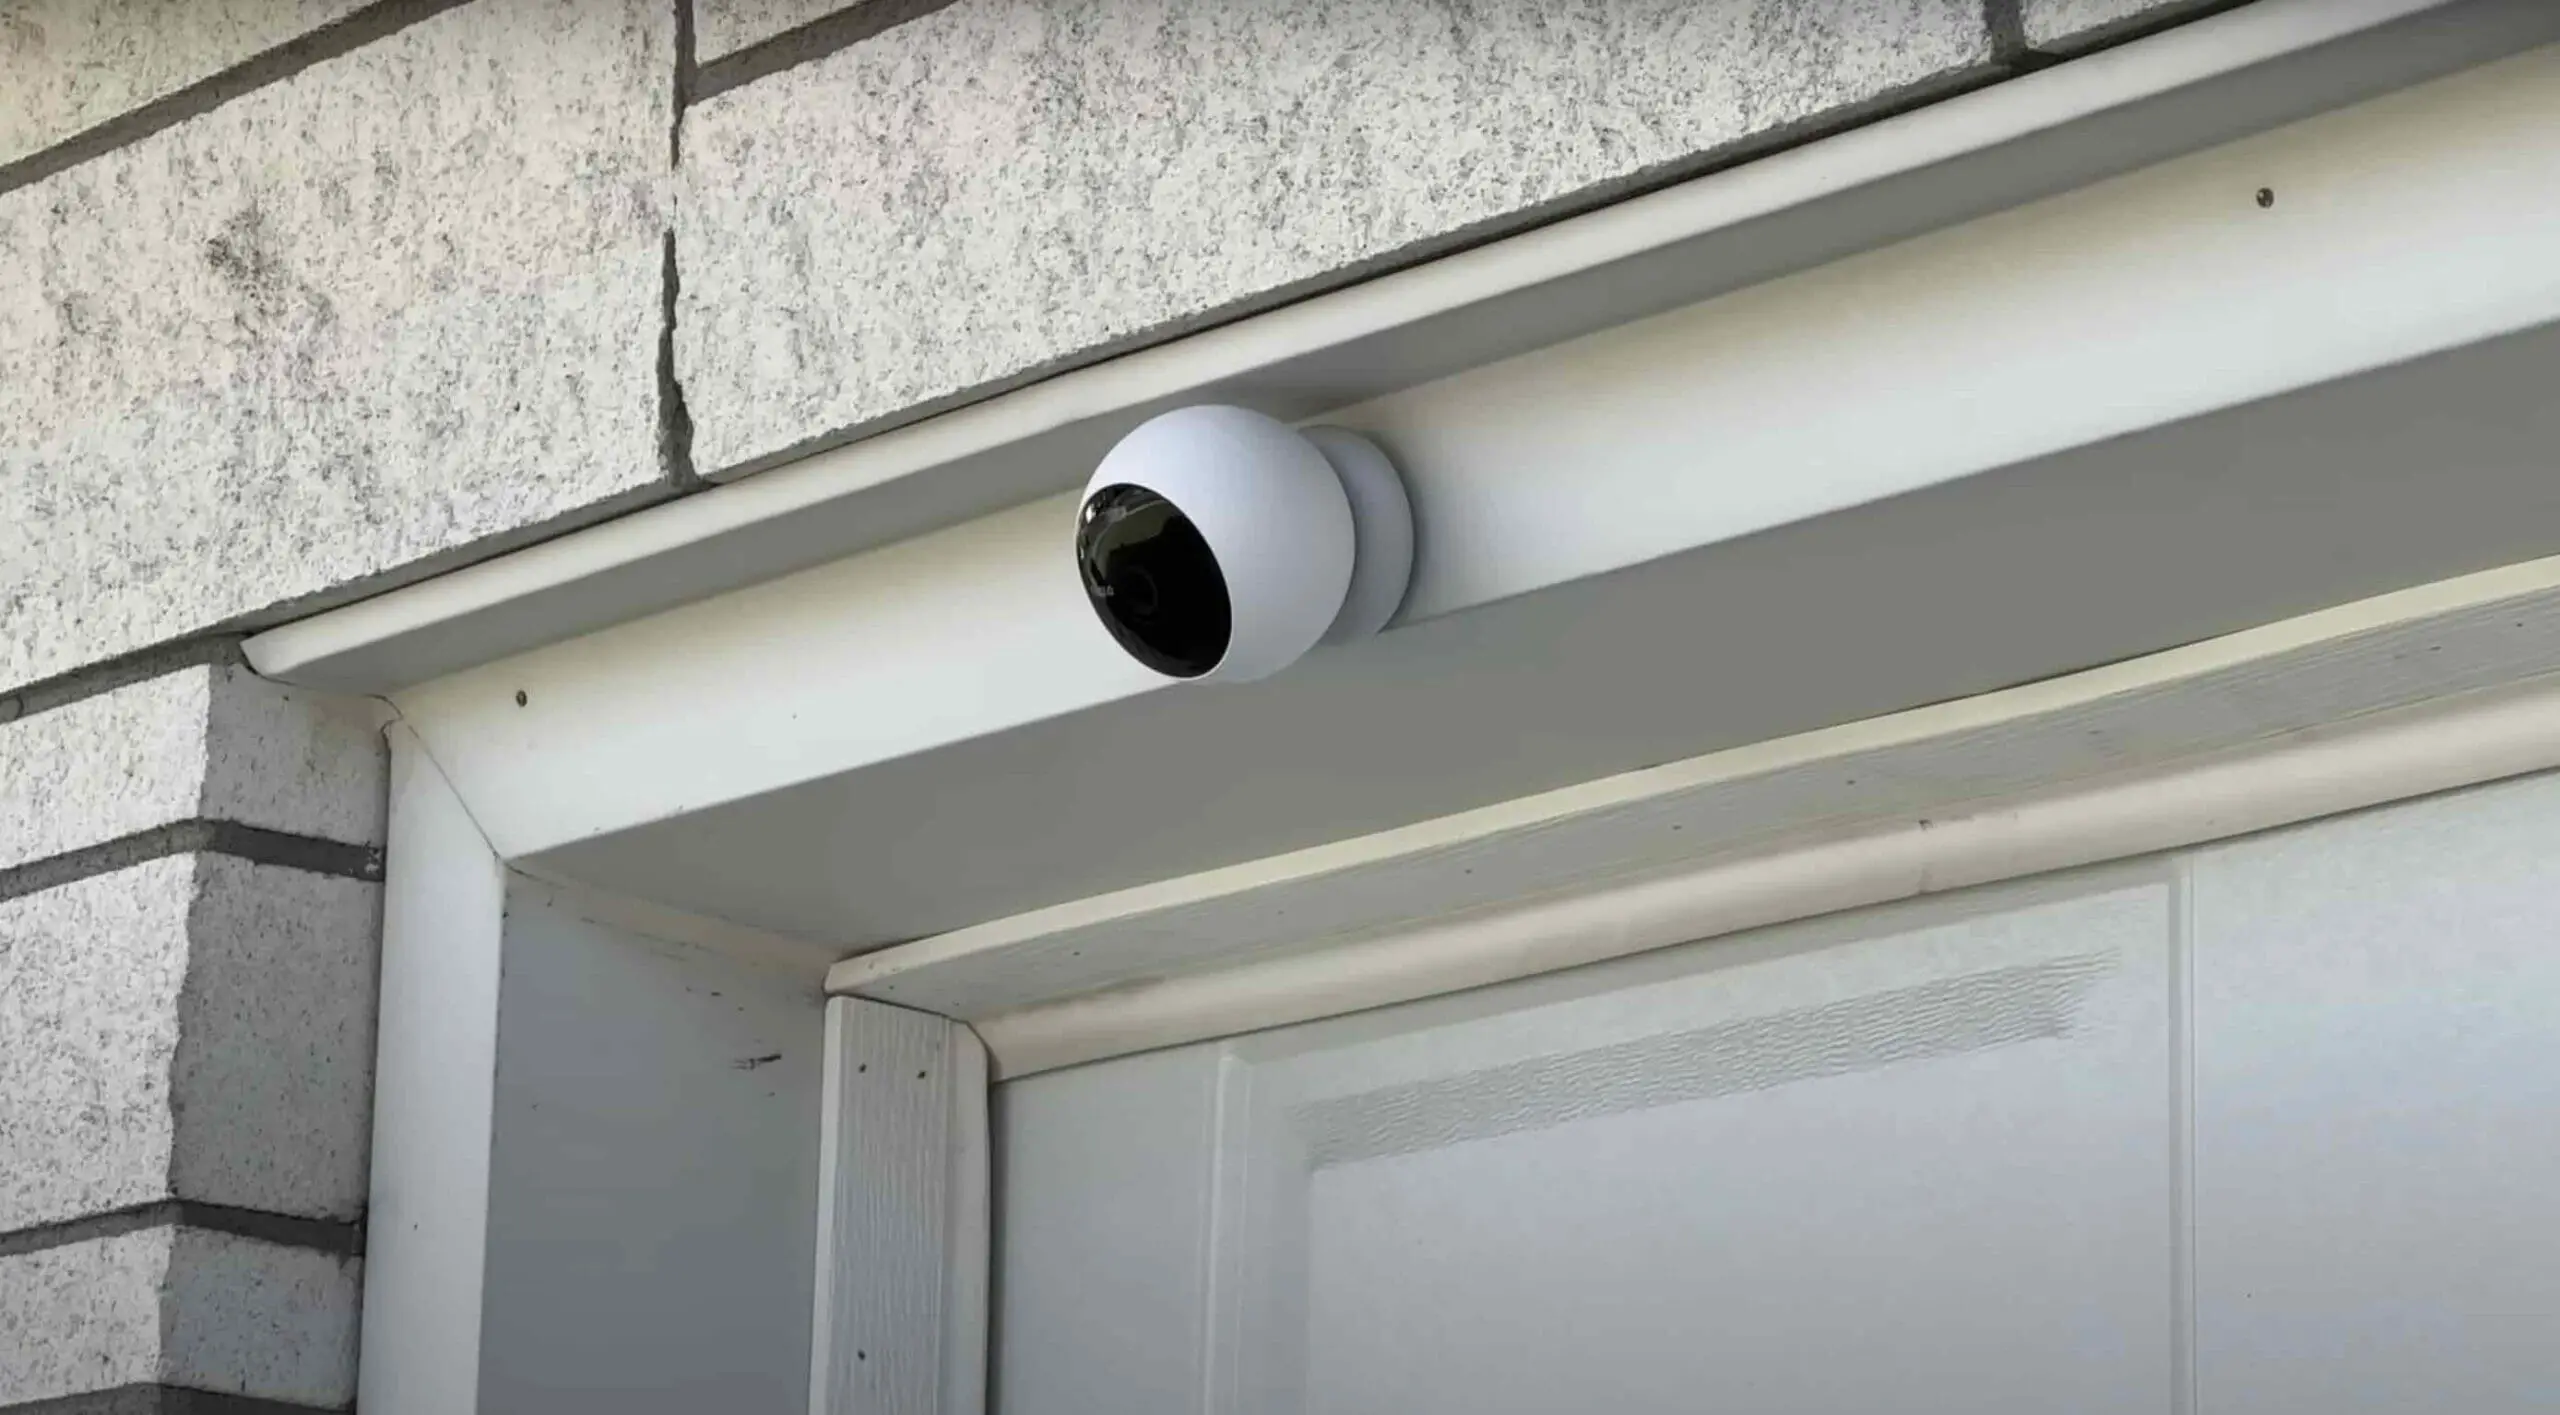 wireless security camera mounted in an outdoor window